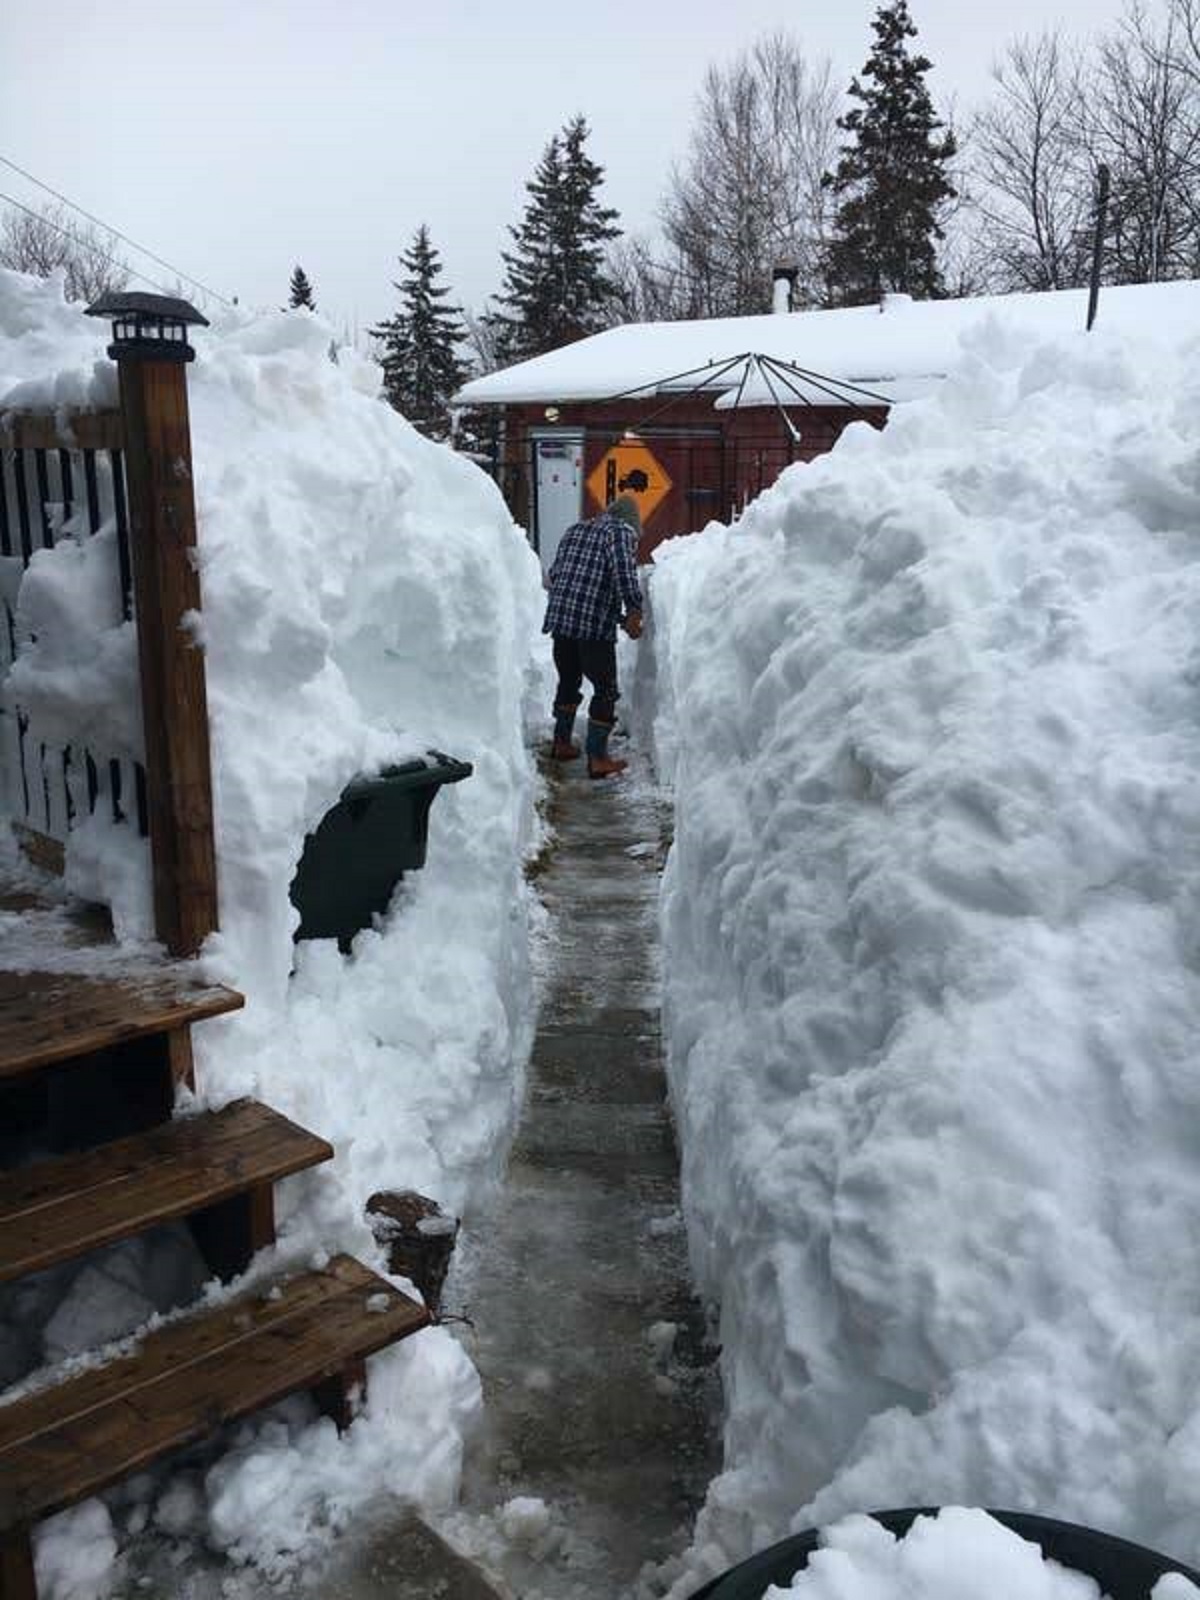 This is what 8 feet of snow looks like: